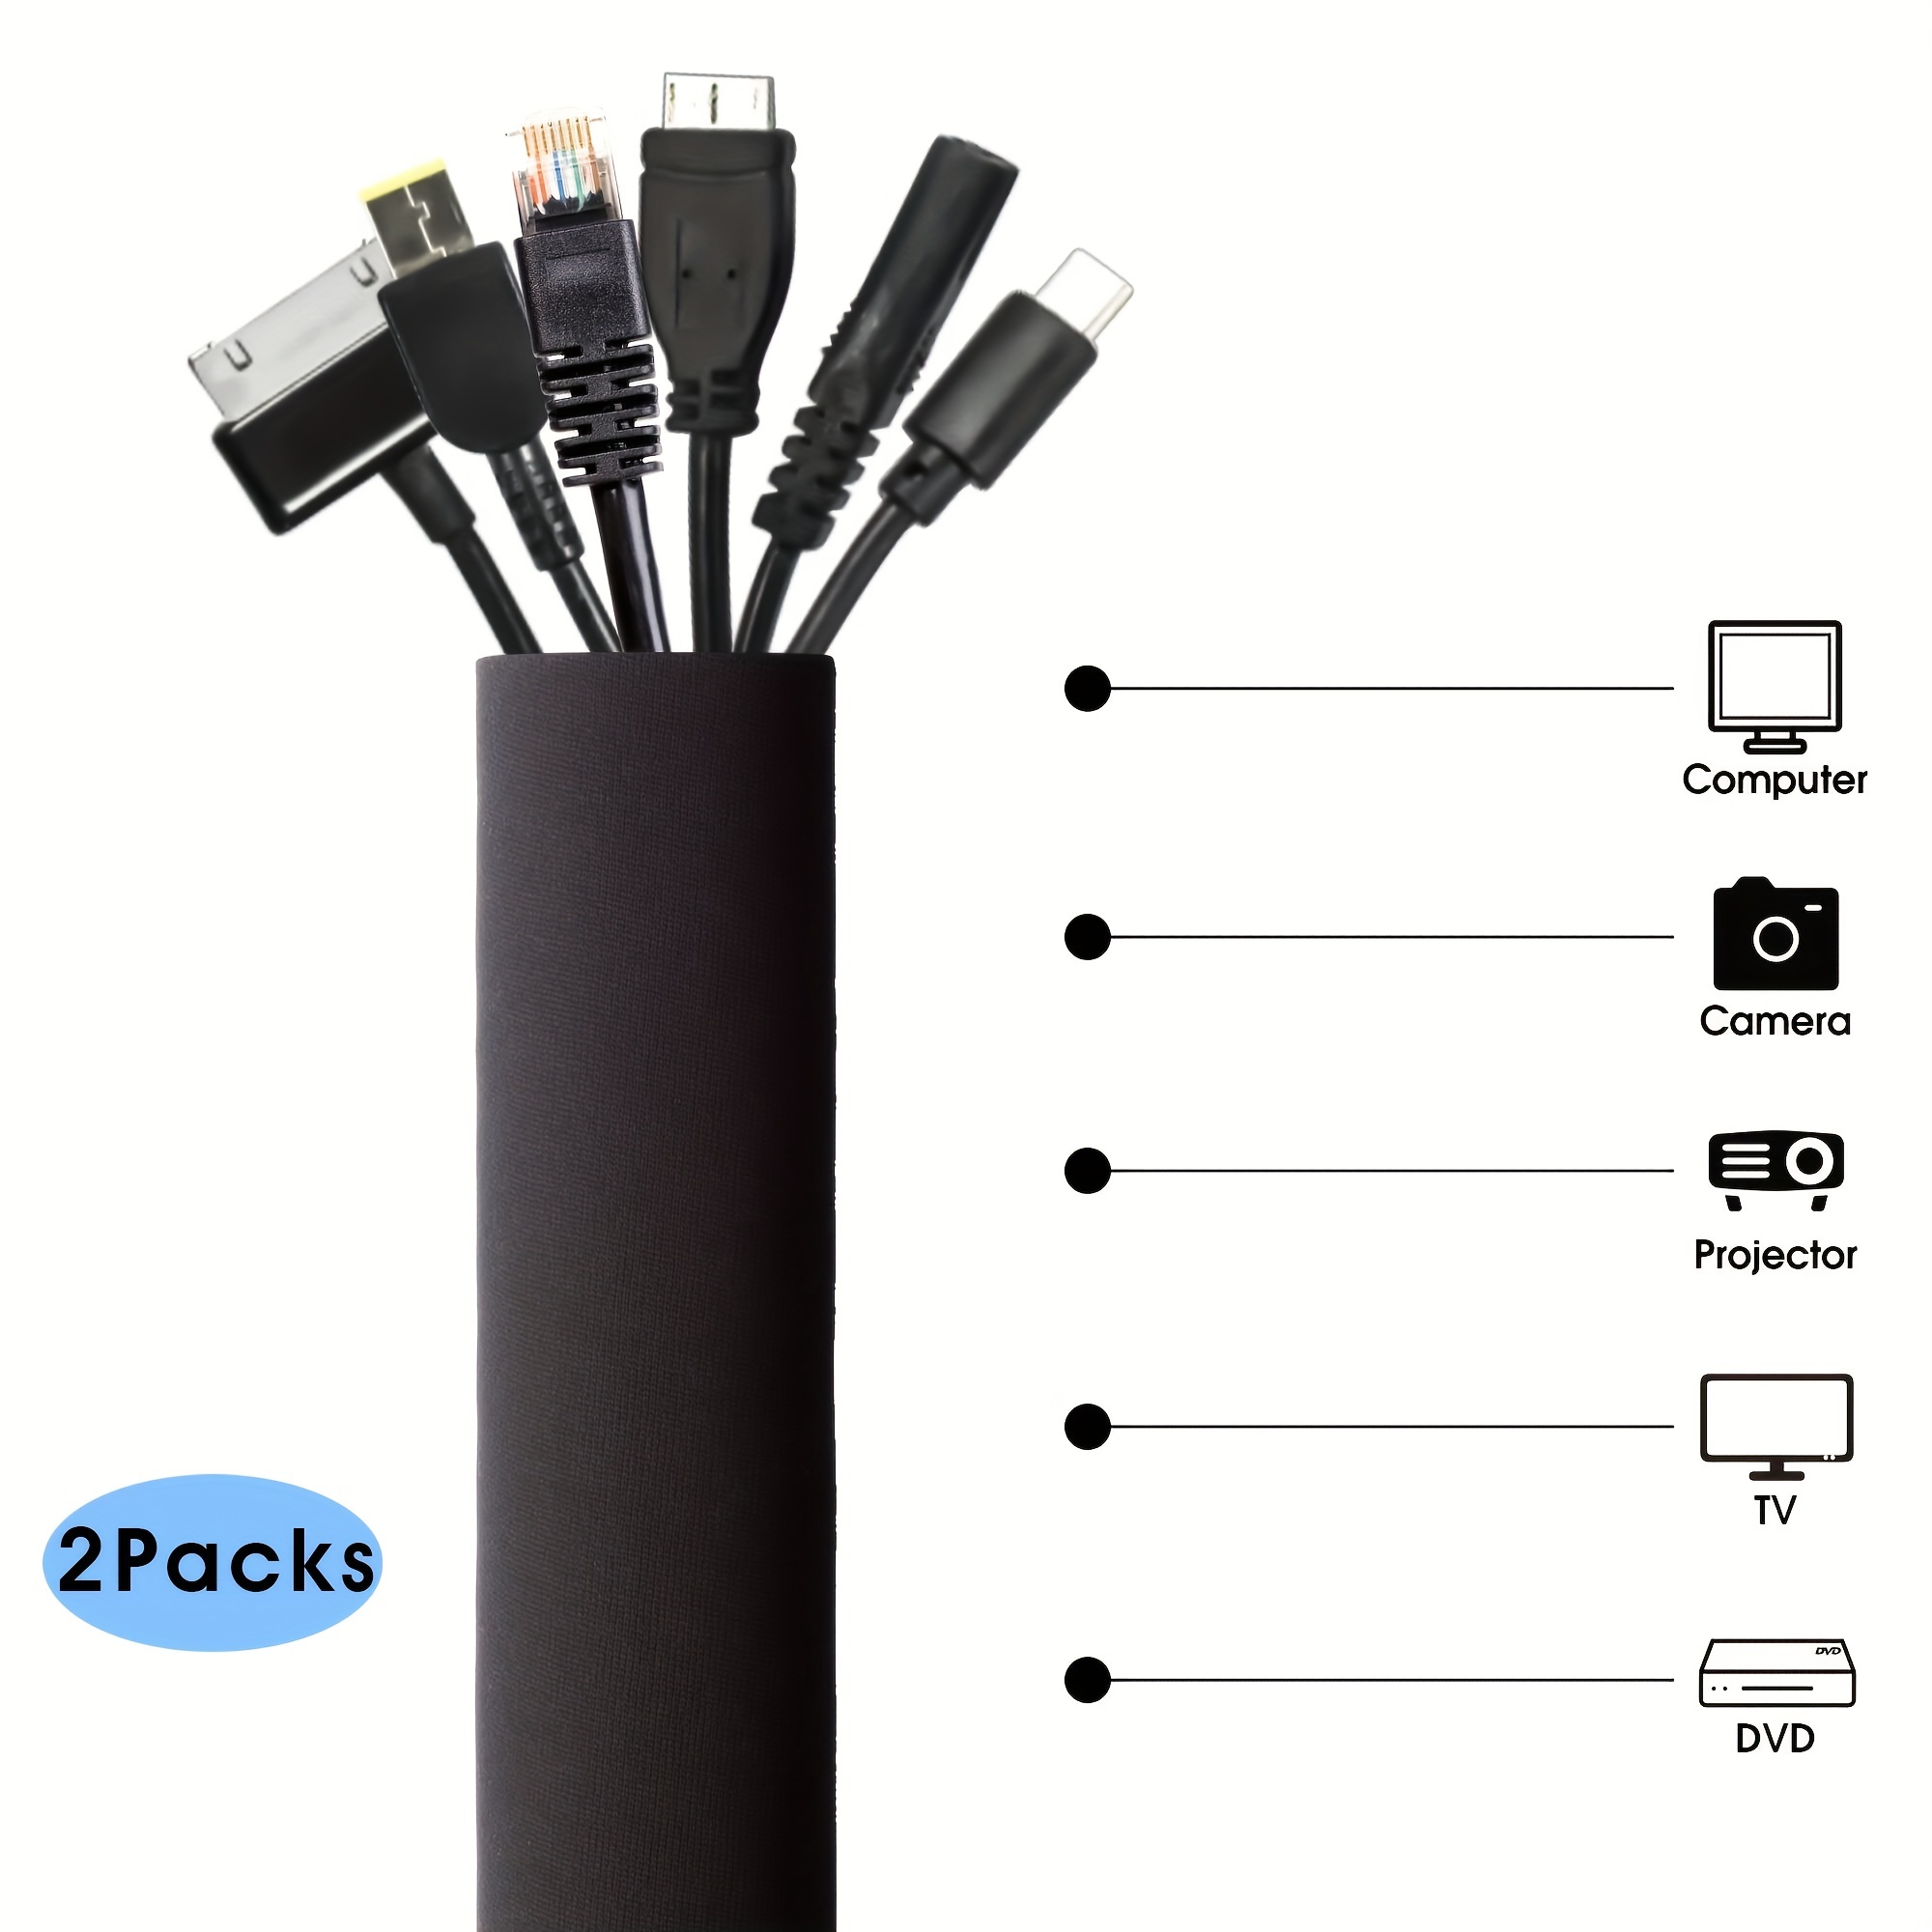 Cable Management Sleeves, Cord Organizer Sleeve With Zipper, Cable Hider  Sleeves For TV Computer Office Home Entertainment